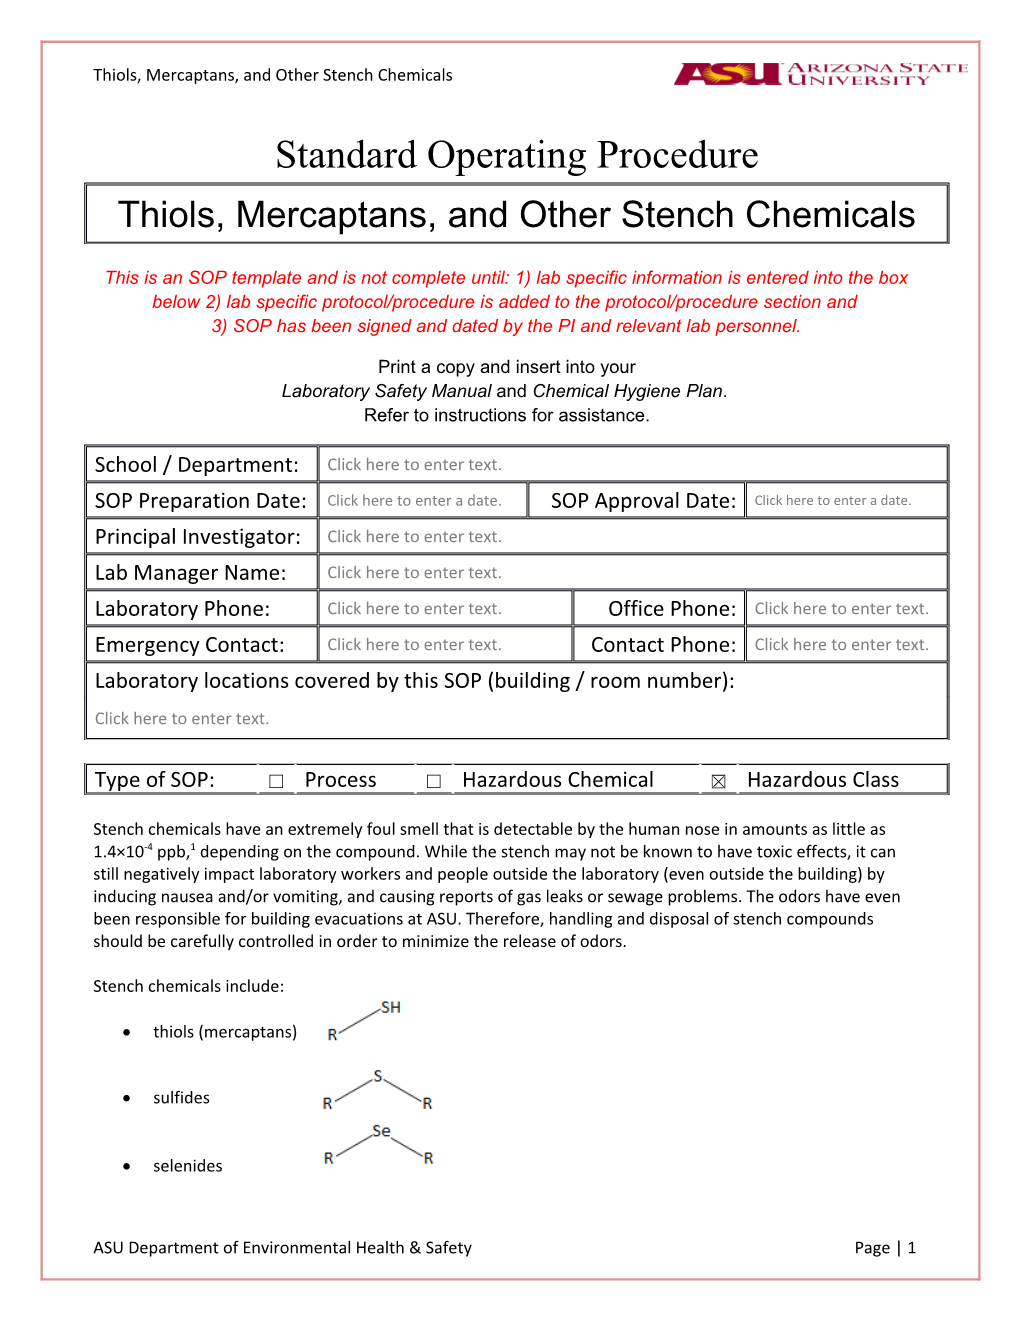 Thiols, Mercaptans, and Other Stench Chemicals